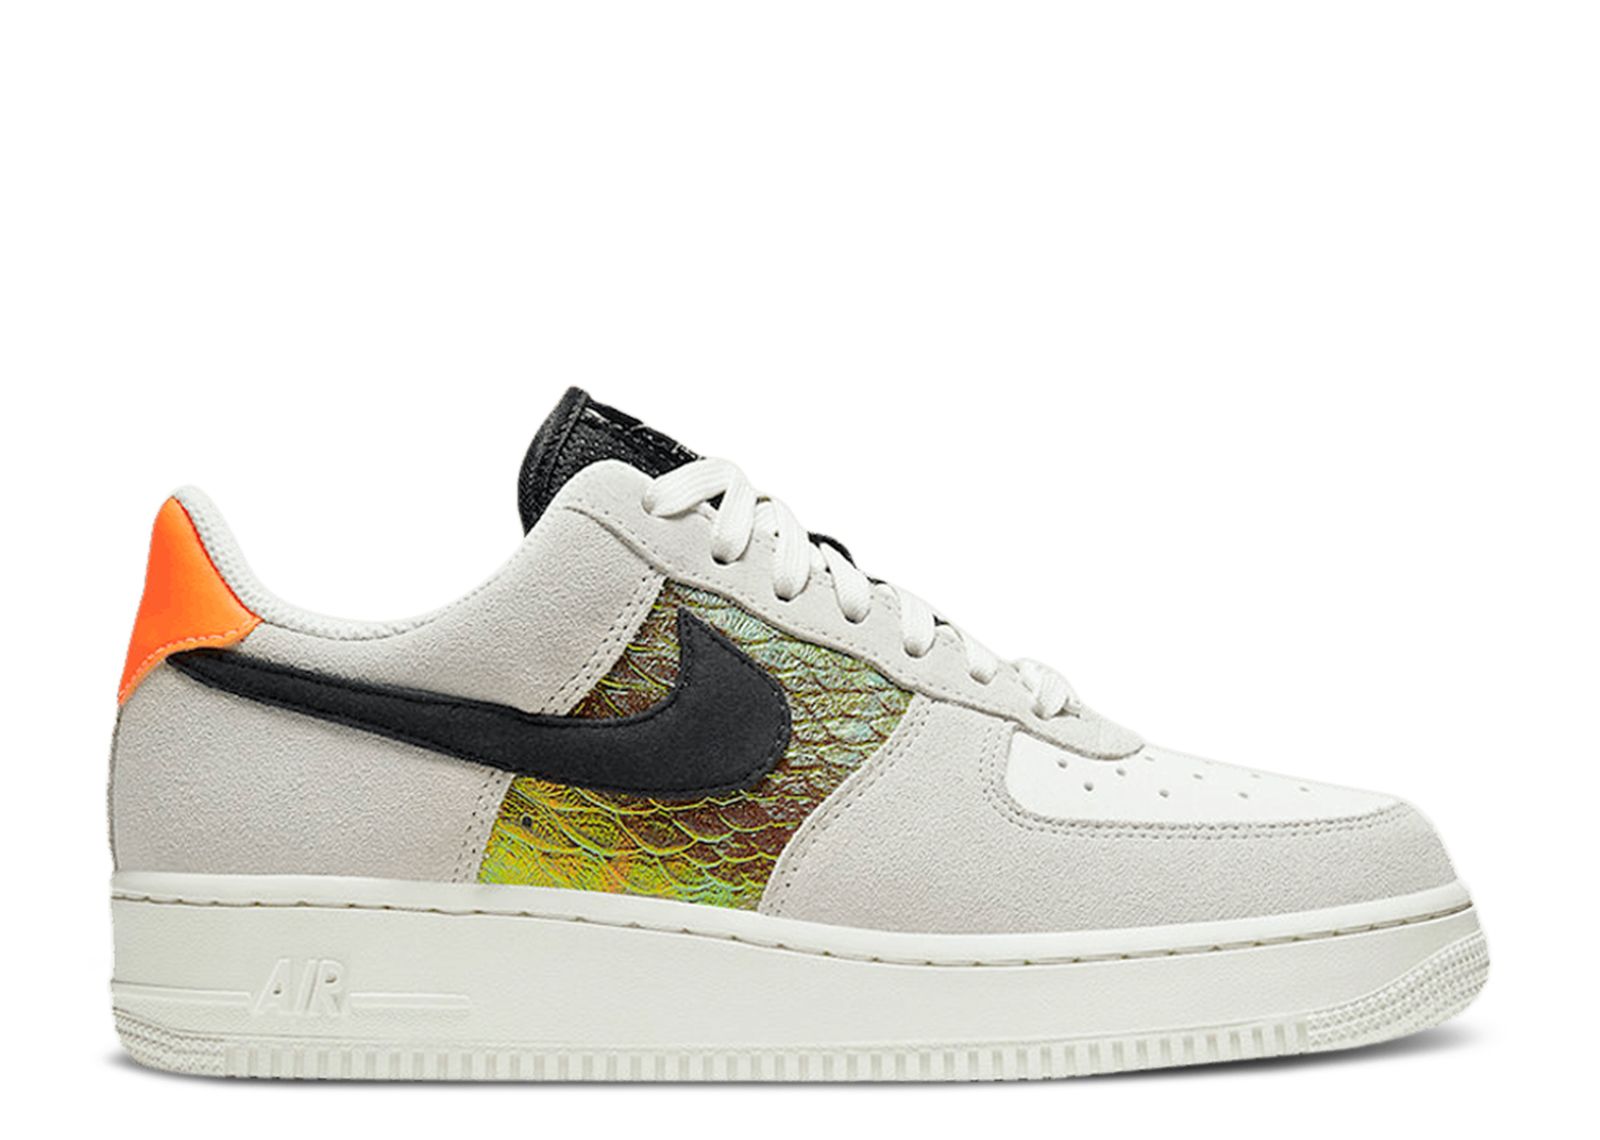 Second Chance - Nike Air Force 1 Low Iridescent Snakeskin - 36